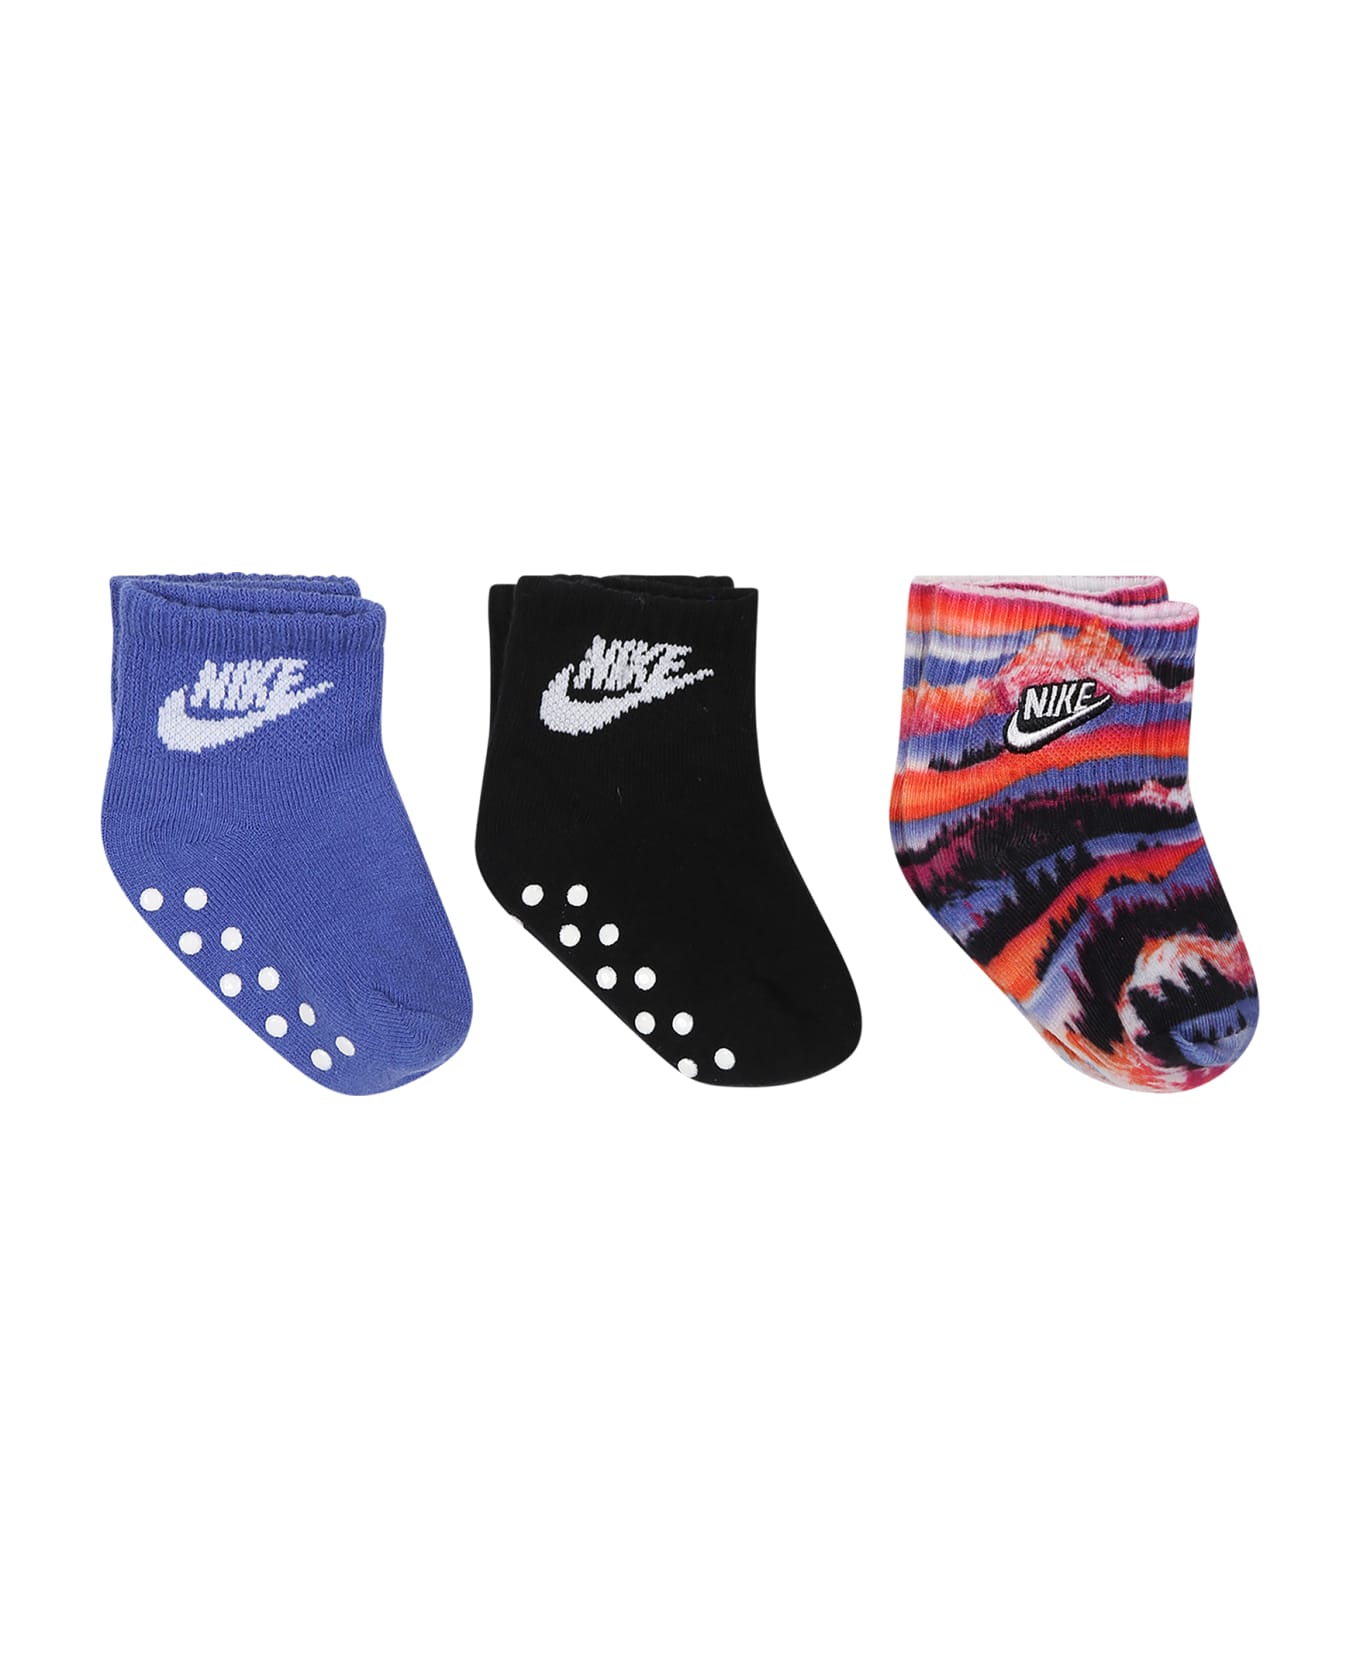 Nike Multicolor Set For Babykids With Logo - Multicolor アクセサリー＆ギフト